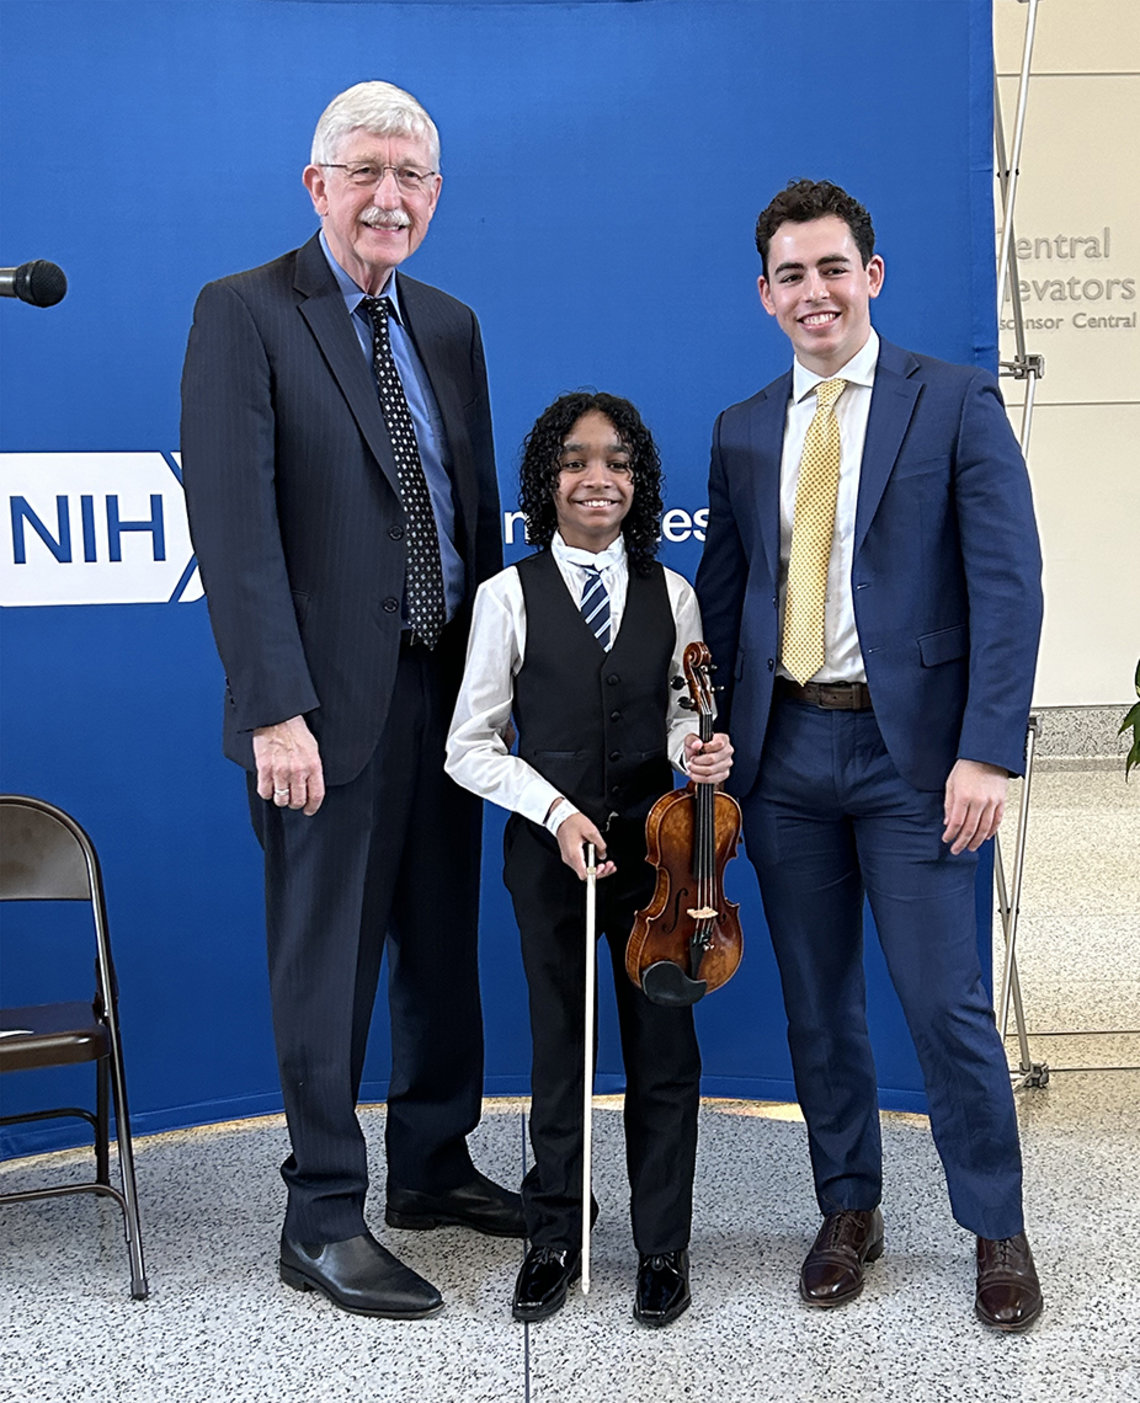 Collins, Caesar (holding his violin) and Masi stand together for a photo in front of a blue backdrop